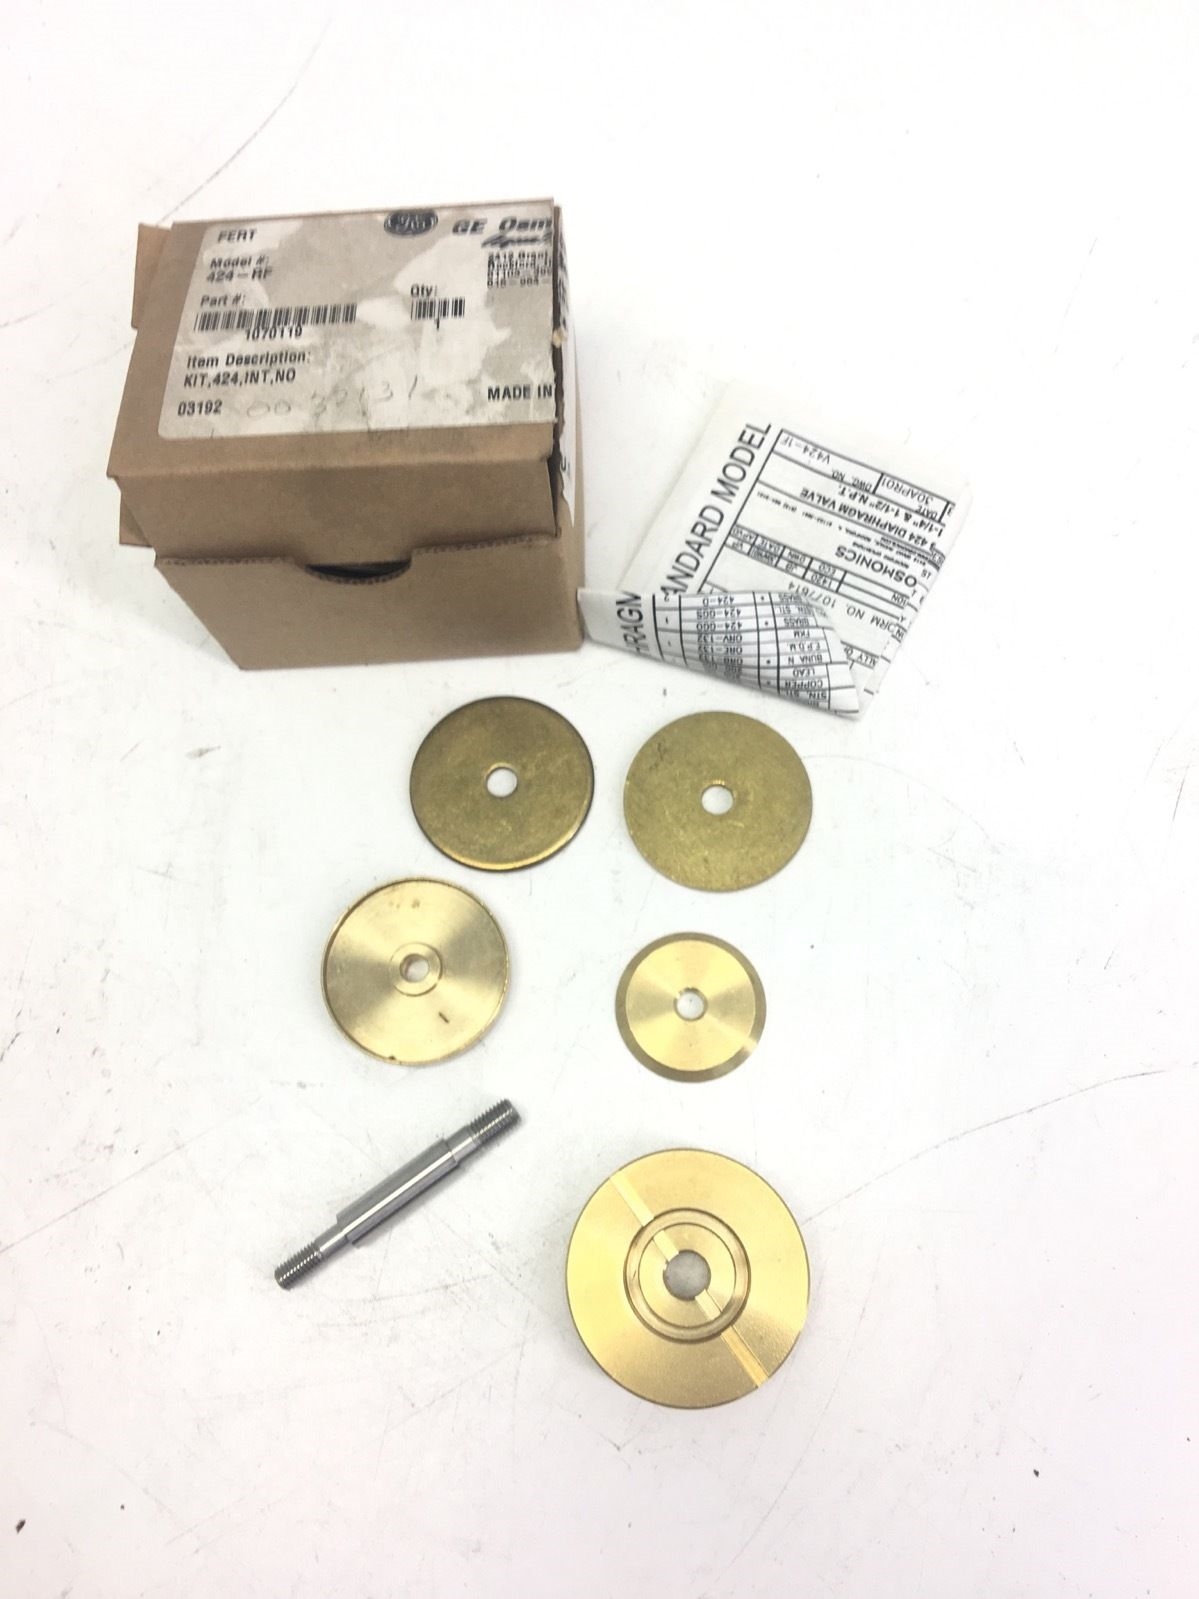 NEW IN BOX Aquamatic Â 424-RF Â INTERNAL PARTS KIT, NORMALLY OPEN VALVES, F230 1